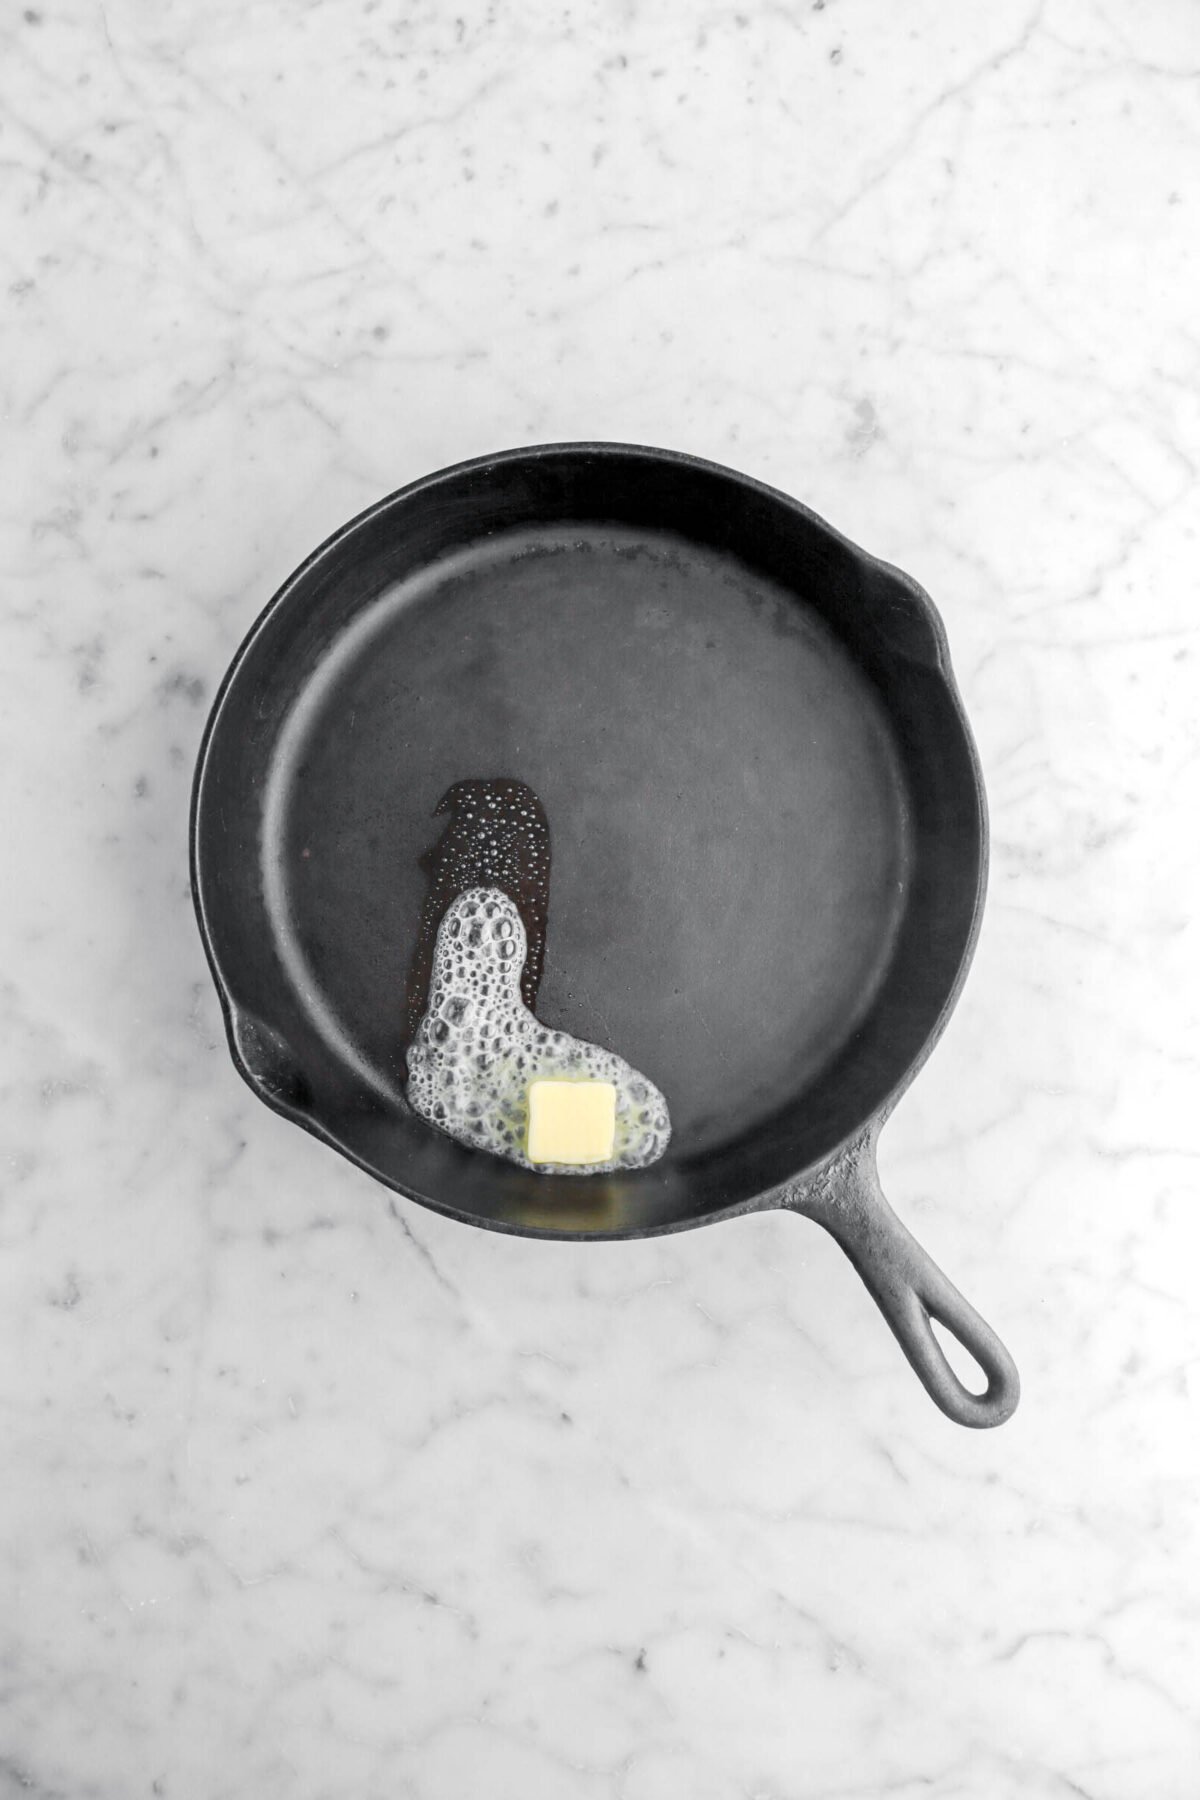 butter added to hot cast iron skillet.